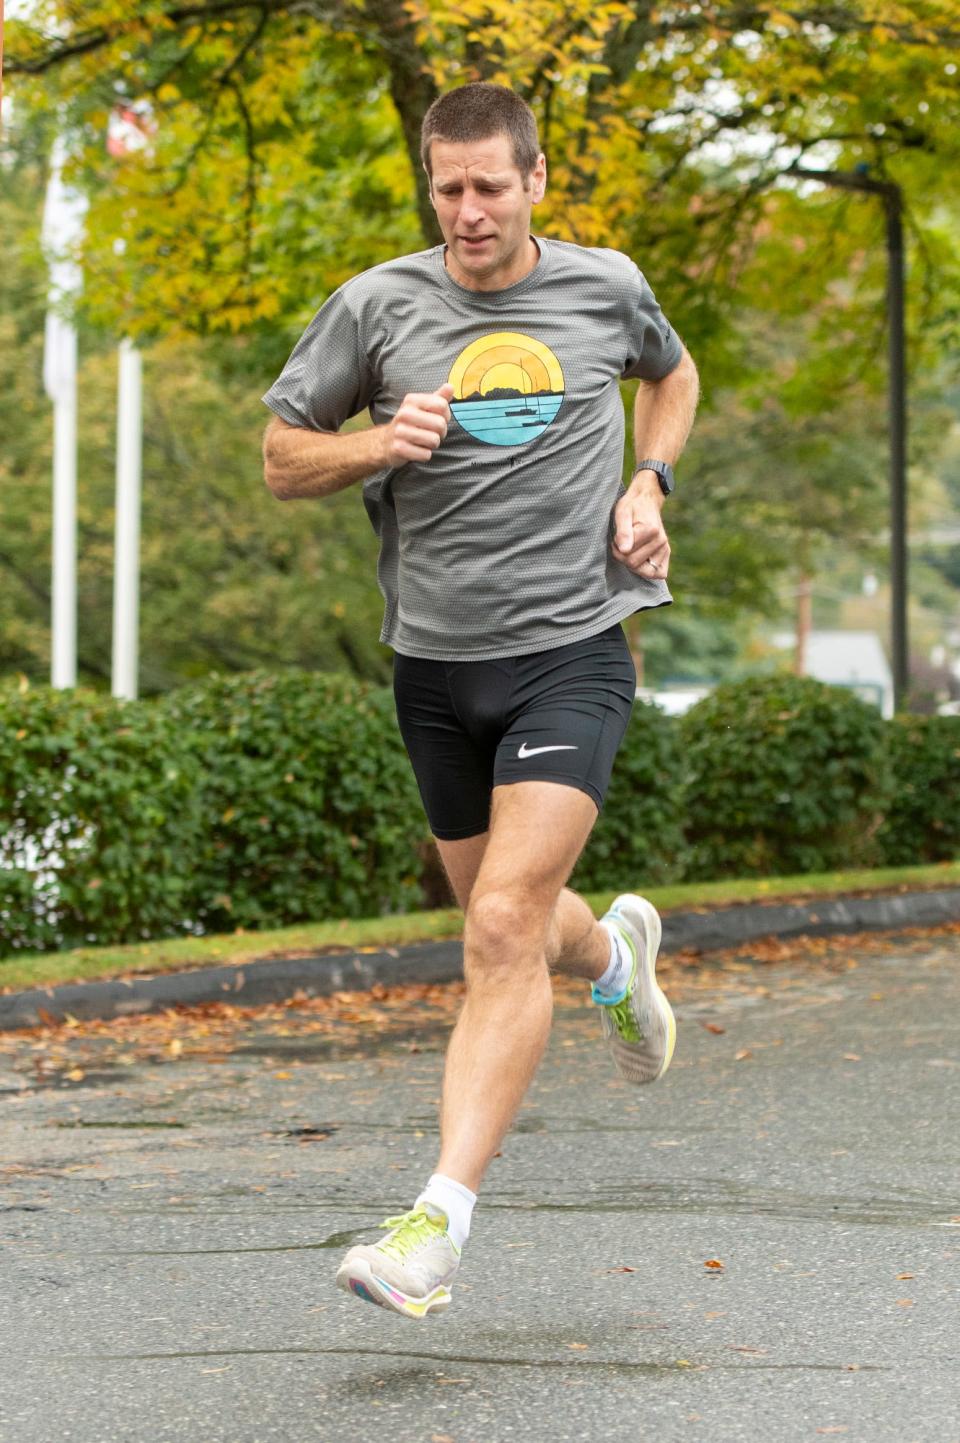 Holden resident Iain Ridgway chalked up another road racing victory, this time at the Hyannis Marathon earlier this month.